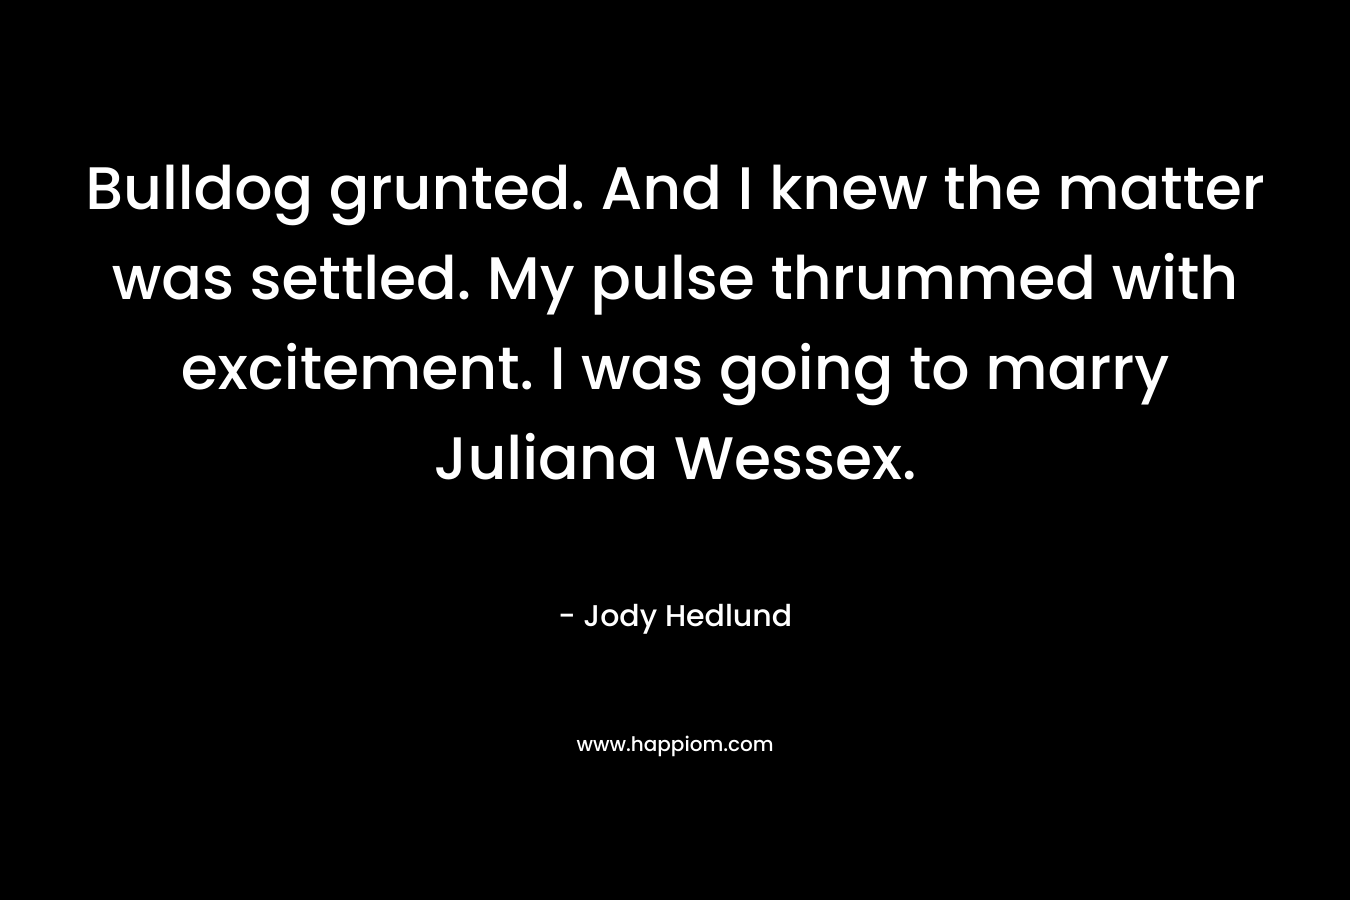 Bulldog grunted. And I knew the matter was settled. My pulse thrummed with excitement. I was going to marry Juliana Wessex.